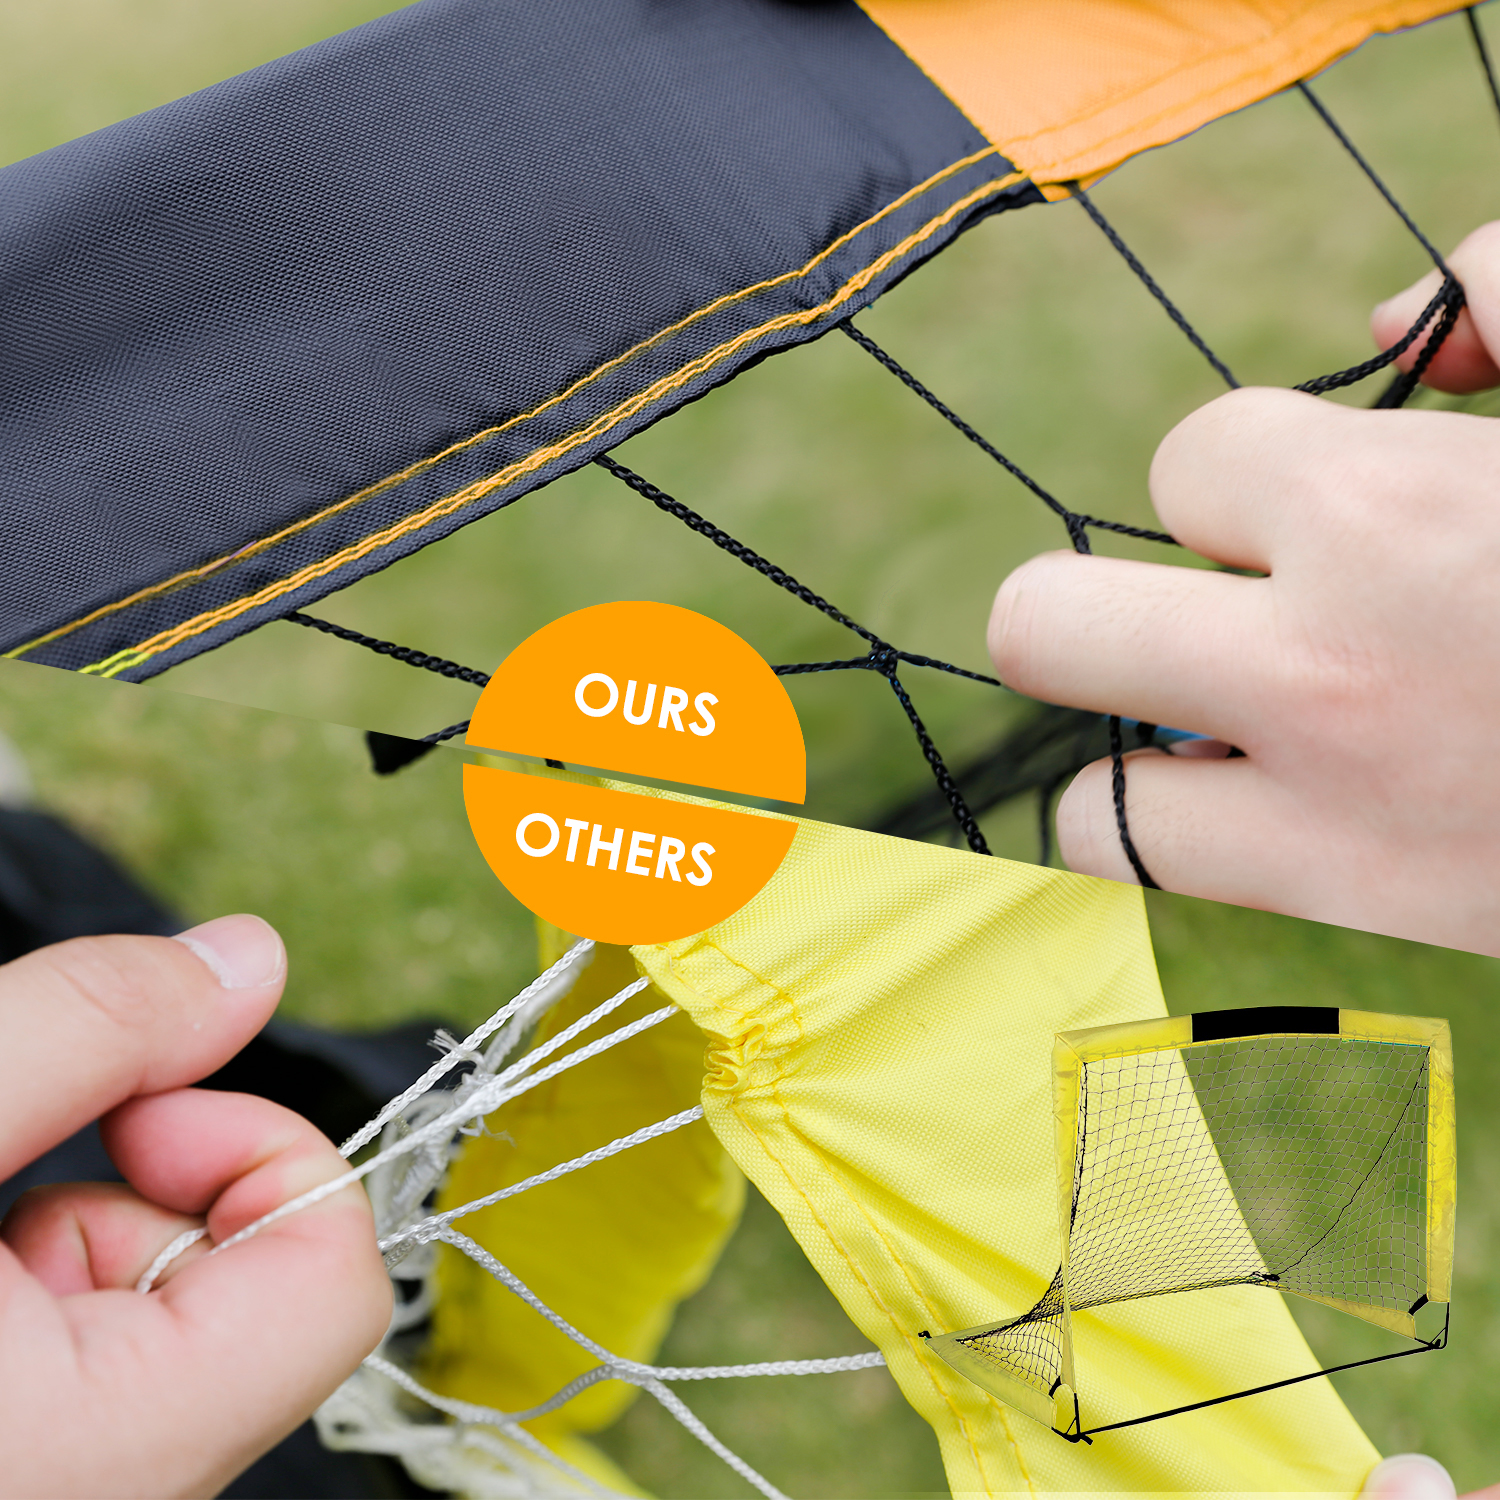 HITIK Soccer Goal 6x4 Portable Soccer Net with Carry Bag for Games and Training for Kids and Teens,Orange - image 4 of 7